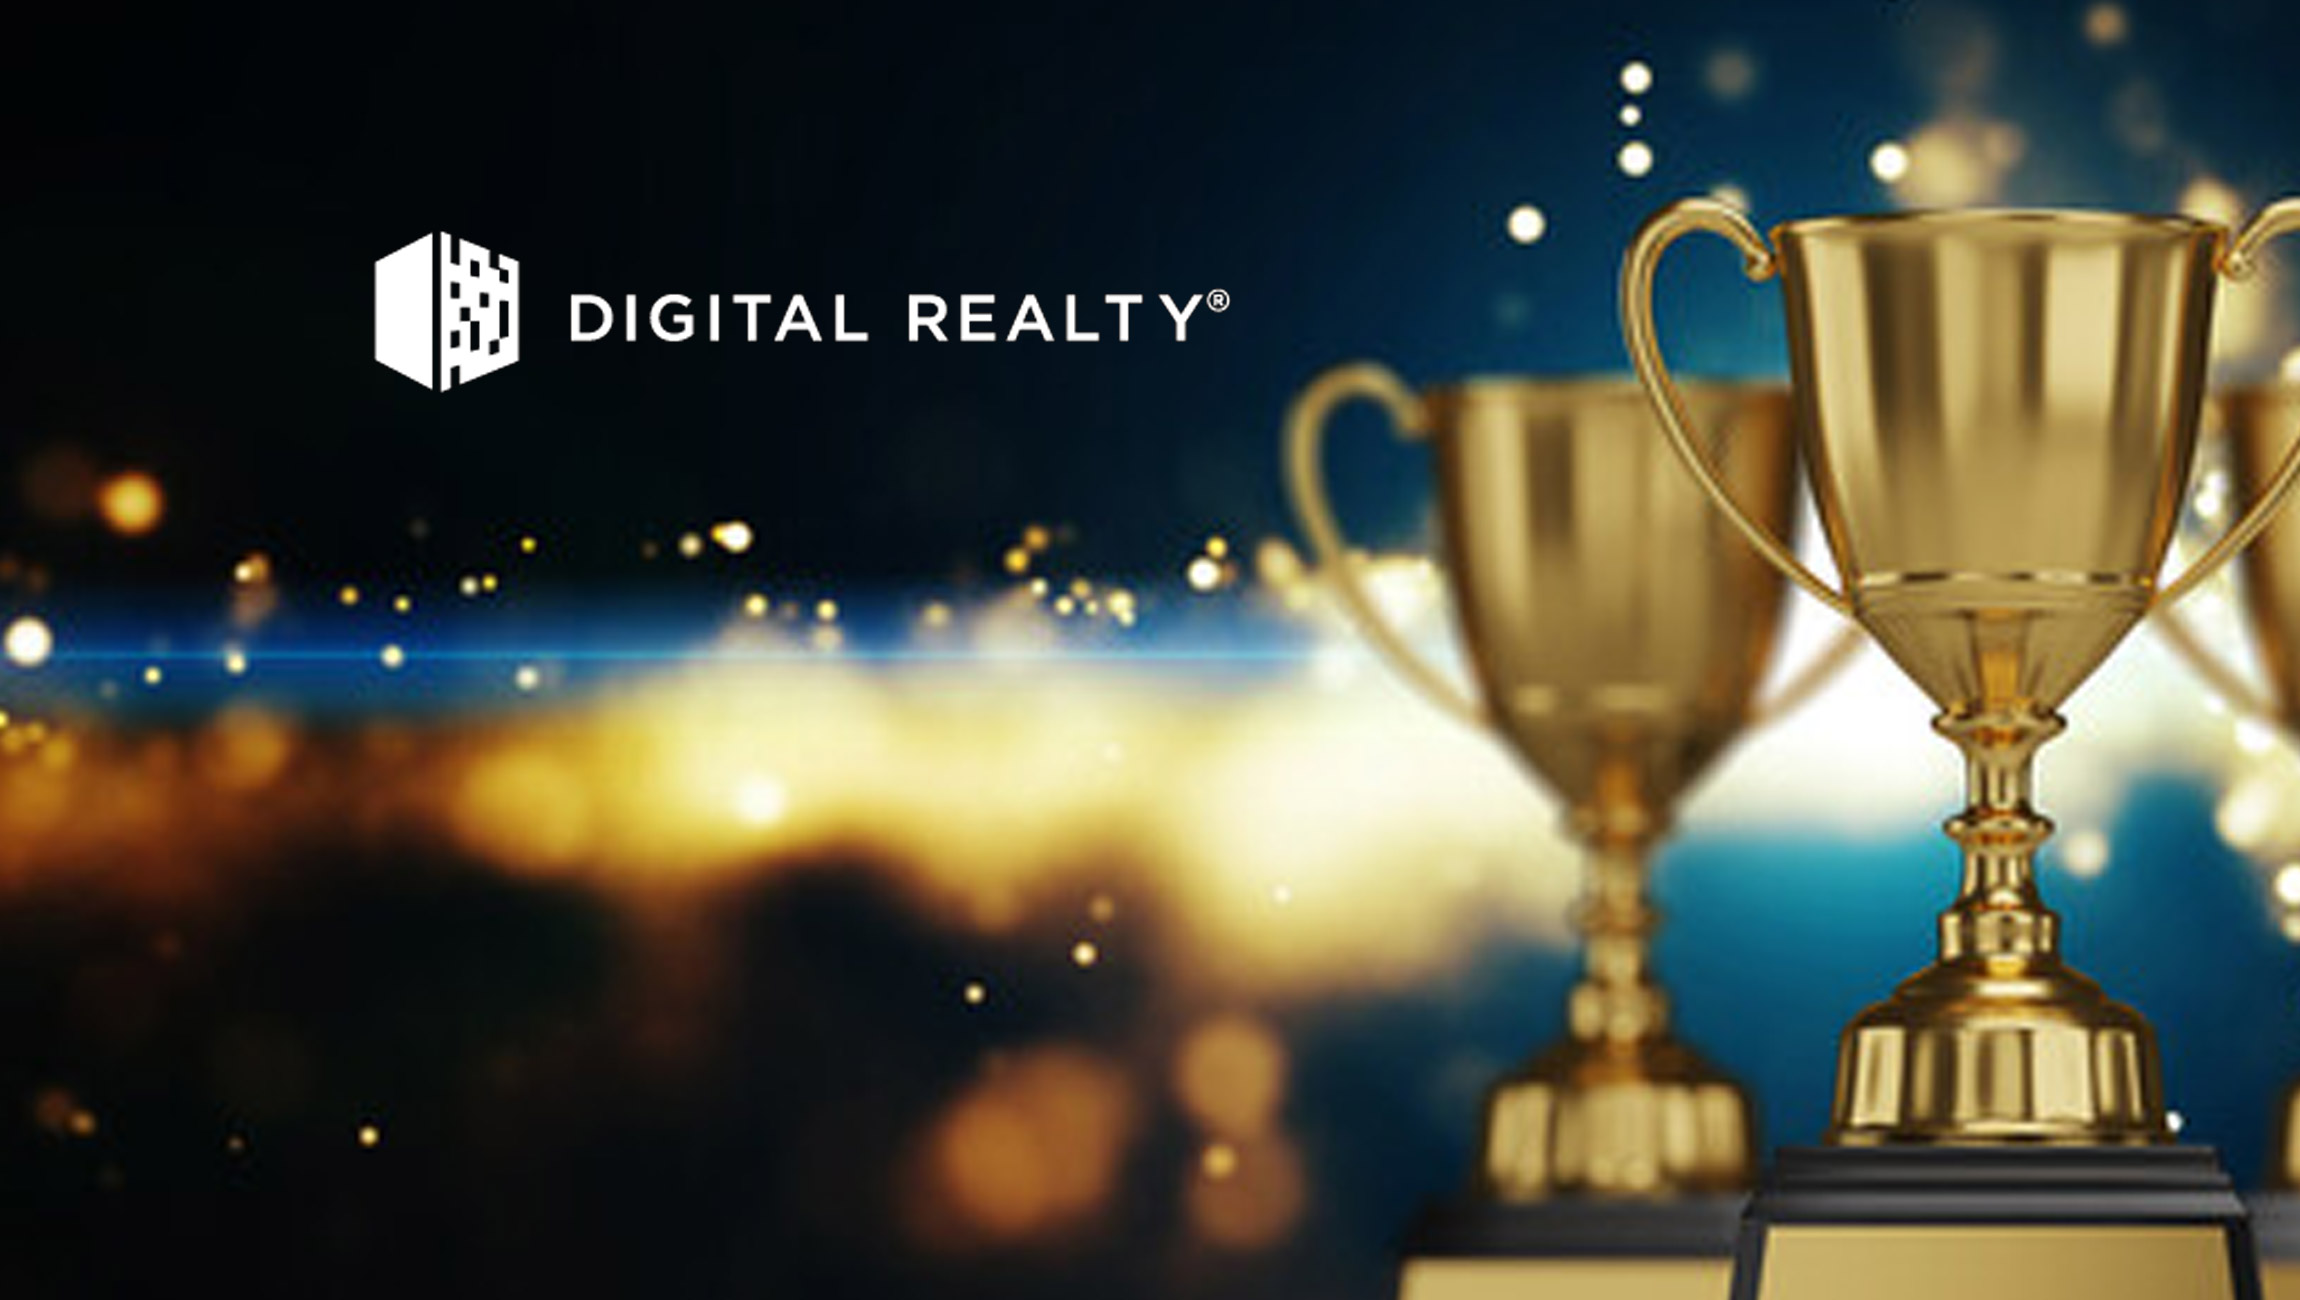 Digital Realty Recognized by Nareit with the “Leader in the Light” Award for Sixth Consecutive Year